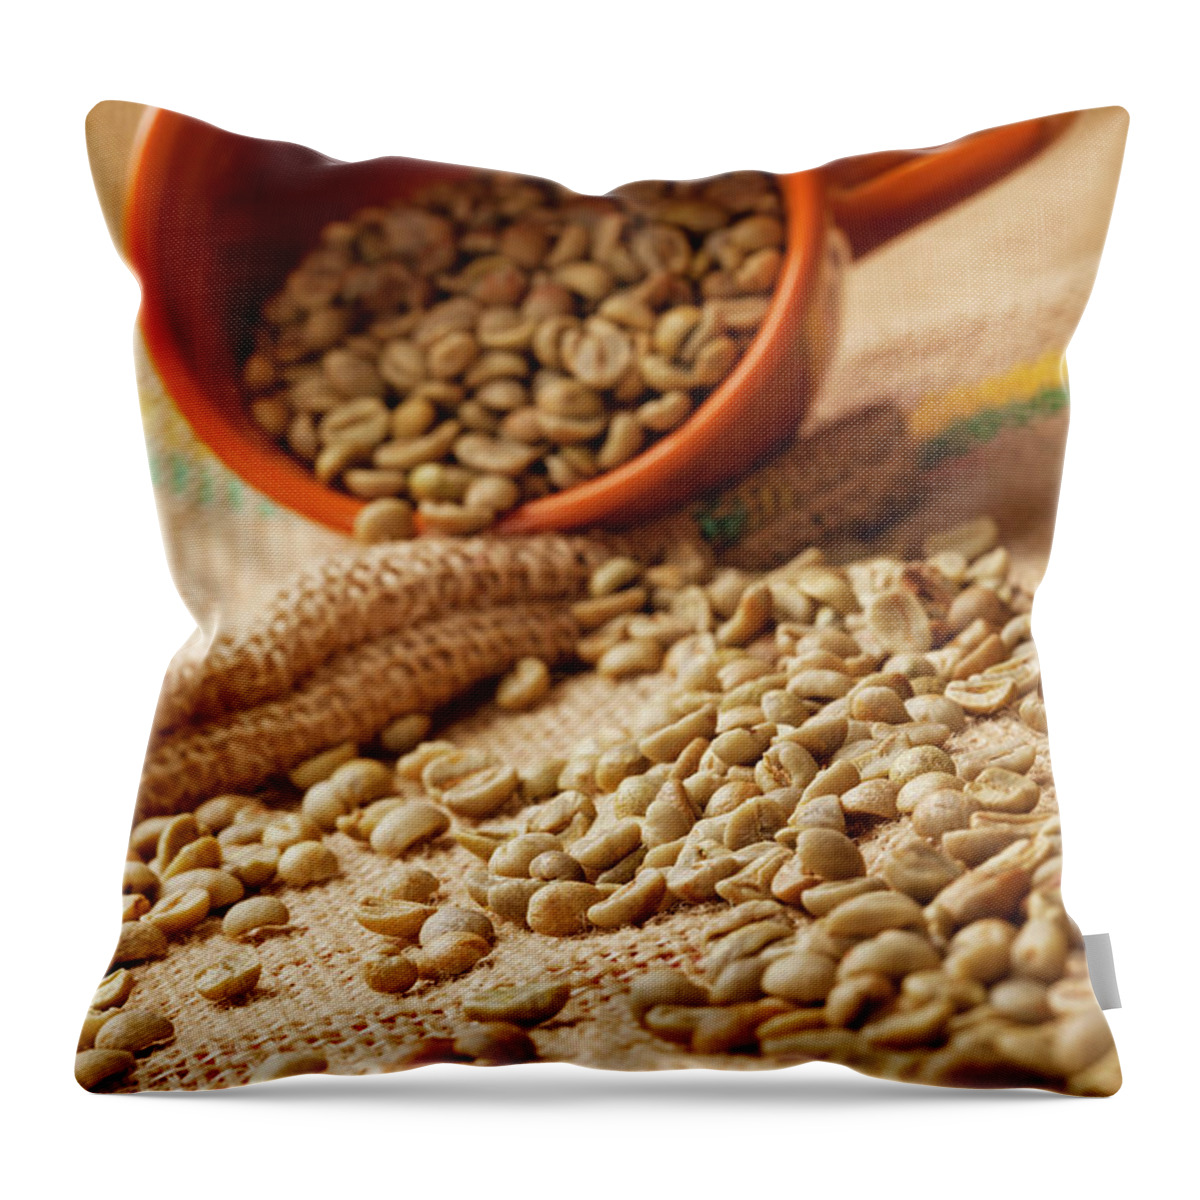 Close-up Throw Pillow featuring the photograph Raw Coffee Bean #3 by Drbouz